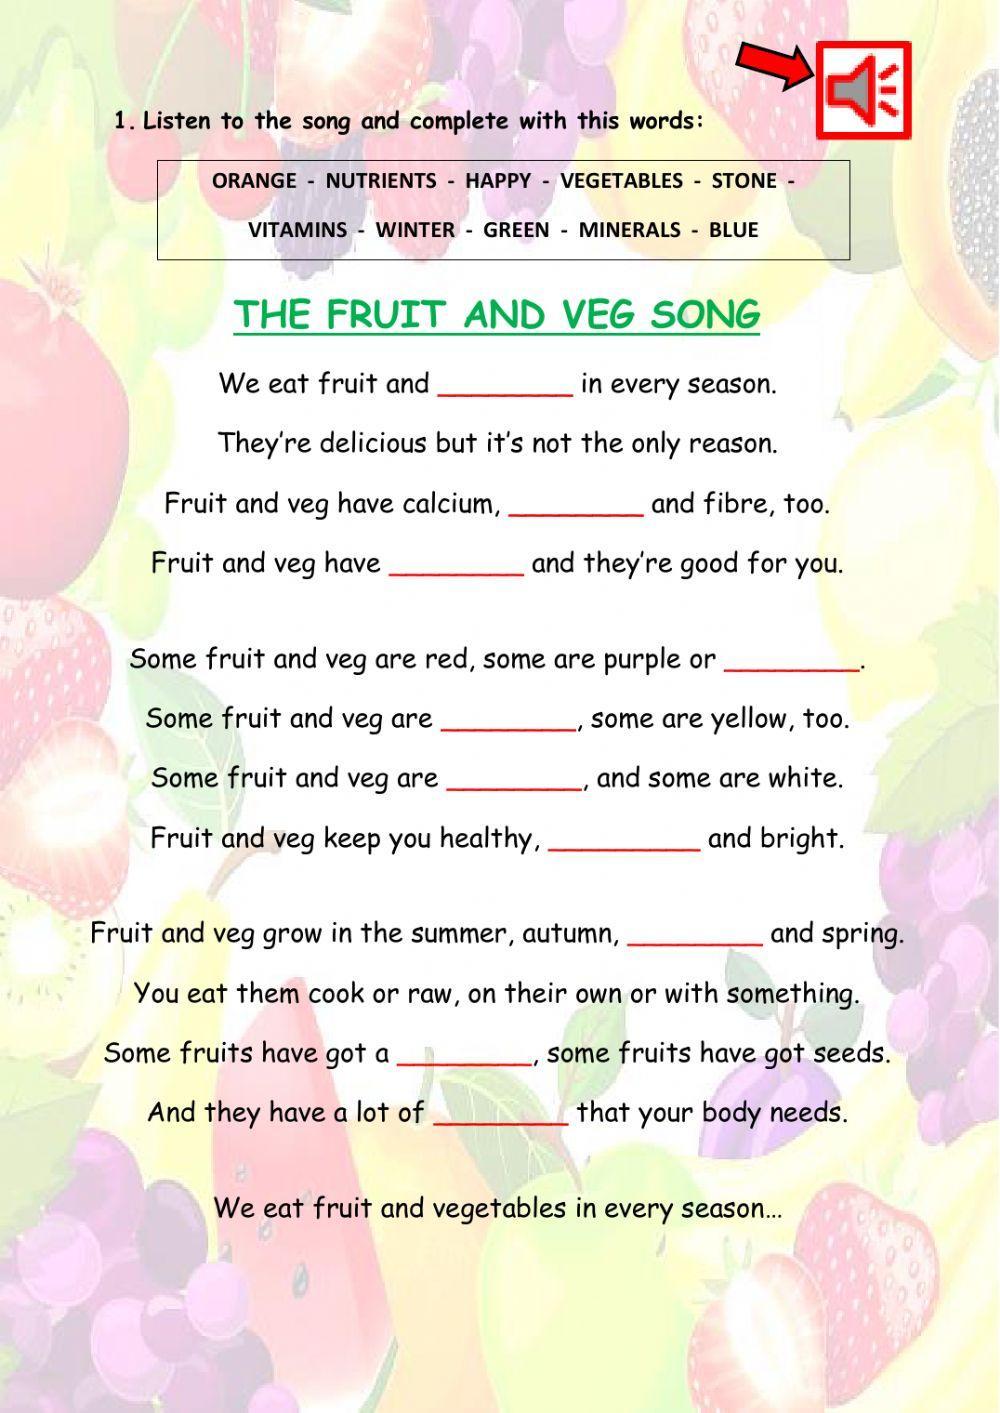 The fruit and veg song